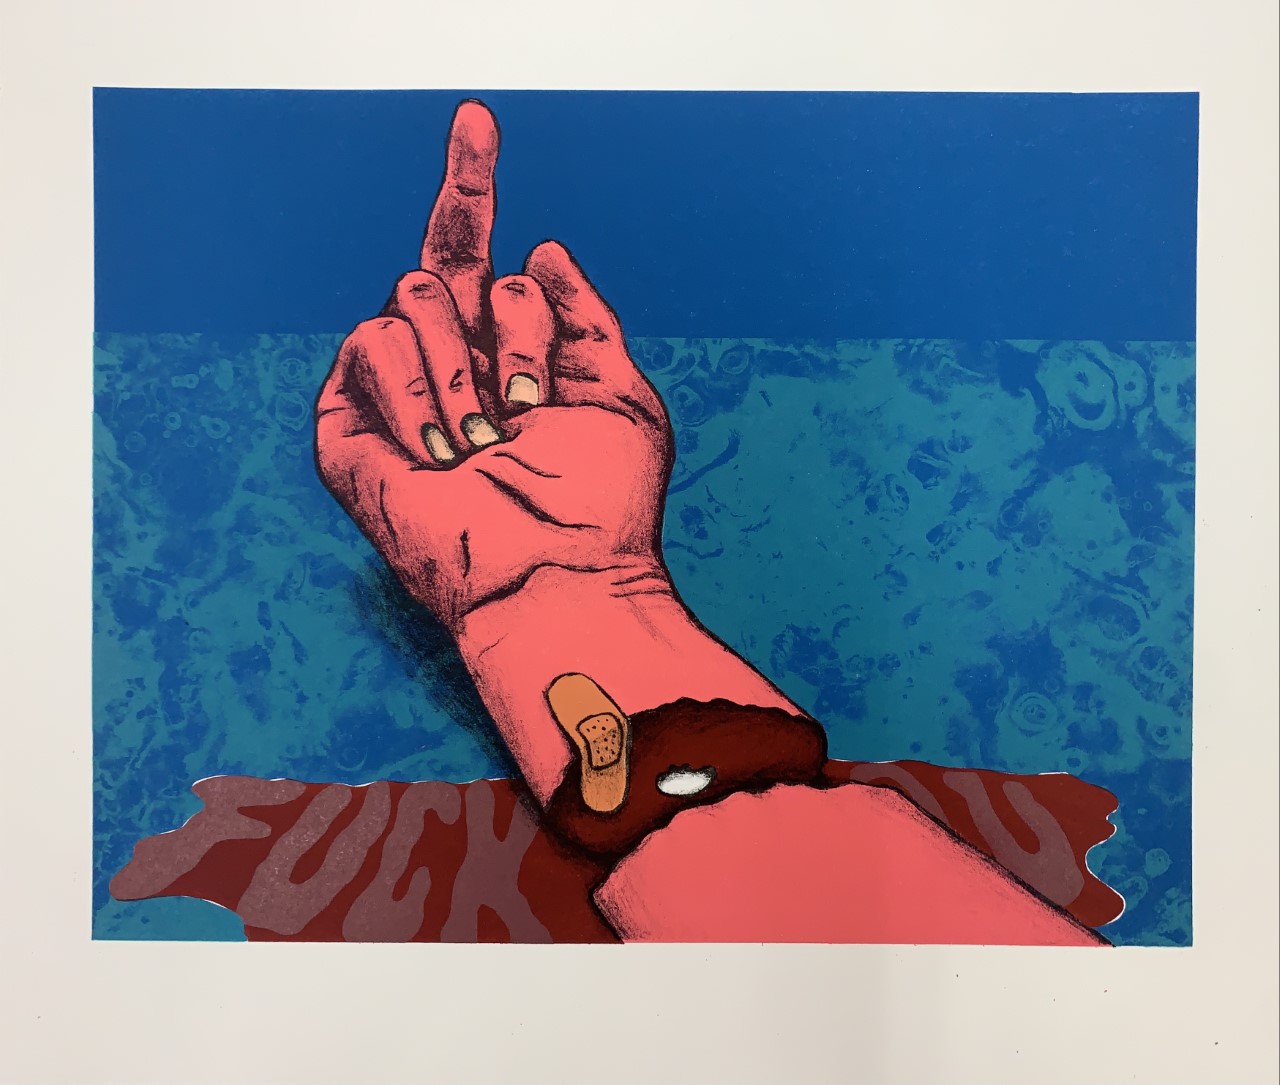 Severed lithography print by Carla Christenson.